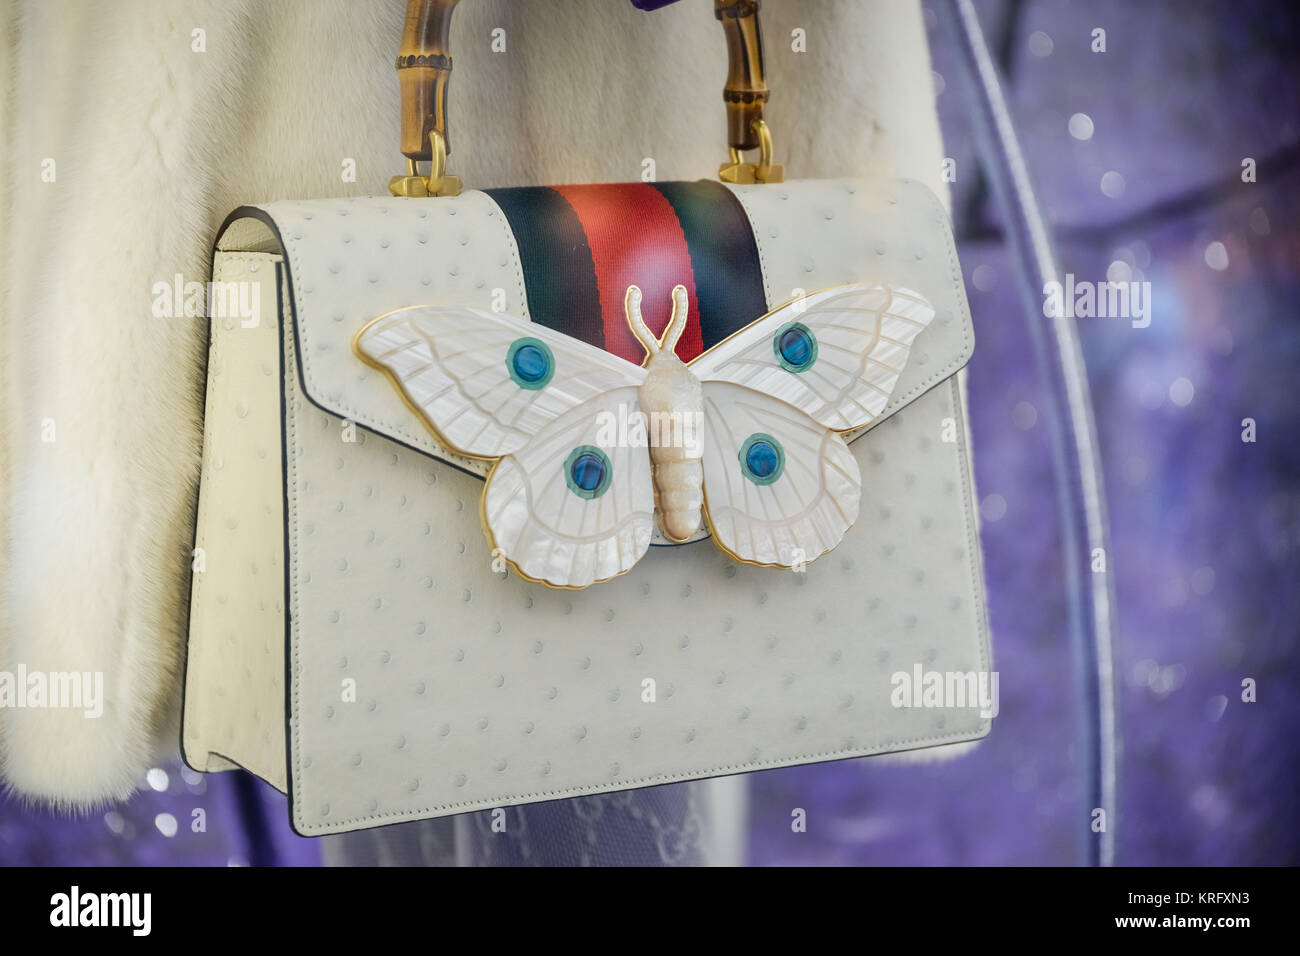 Milan, Italy - September 24, 2017: Gucci bag in a Gucci store in Fashion Stock Photo - Alamy